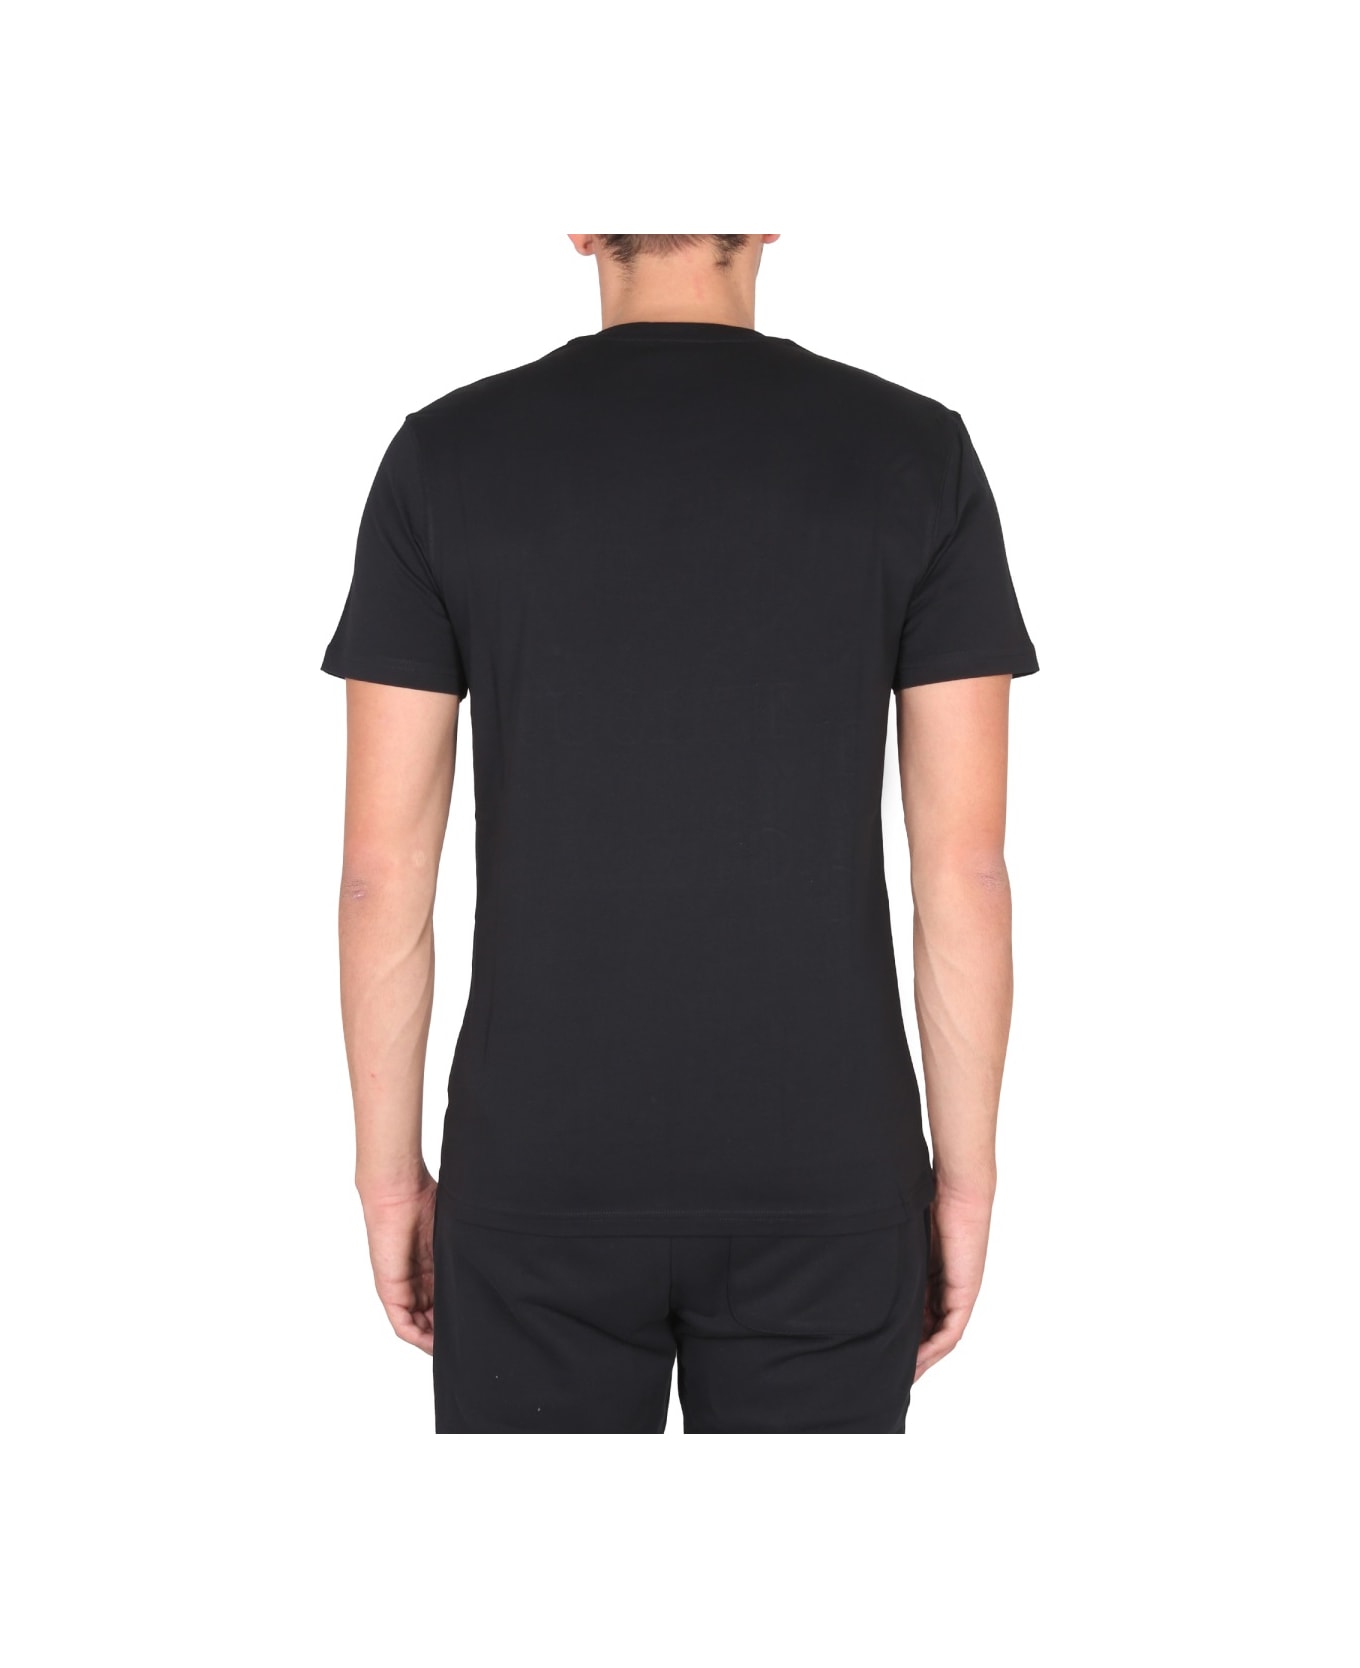 Moschino "guilt Without Guilt" T-shirt - BLACK